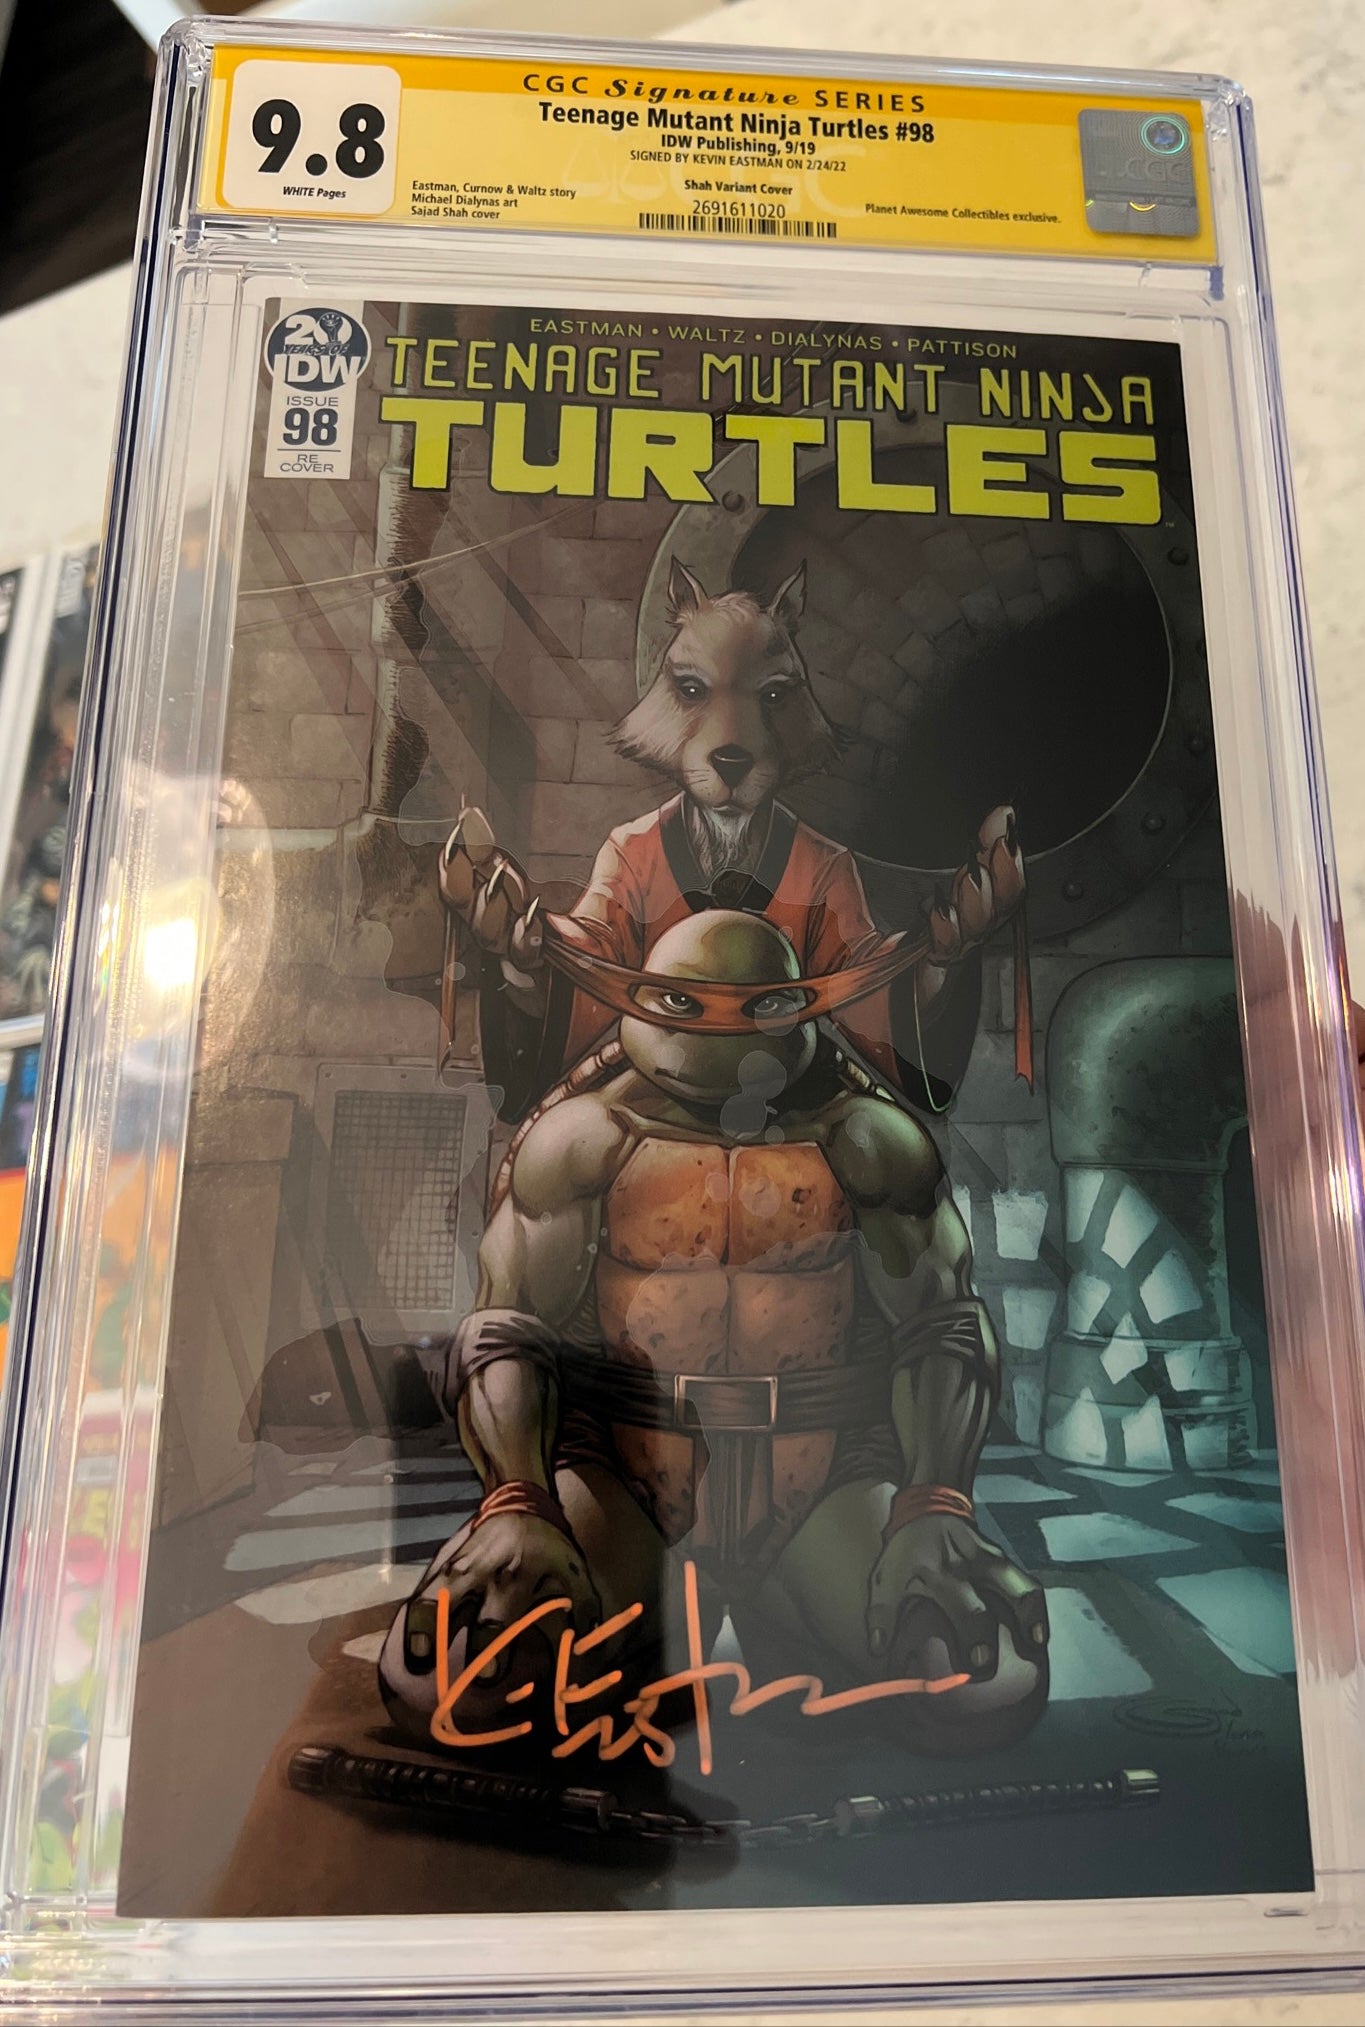 Teenage Mutant Ninja Turtles #98 CGC SS 9.8 Signed by Kevin Eastman (Shah Variant Cover, Planet Awesome Collectibles)